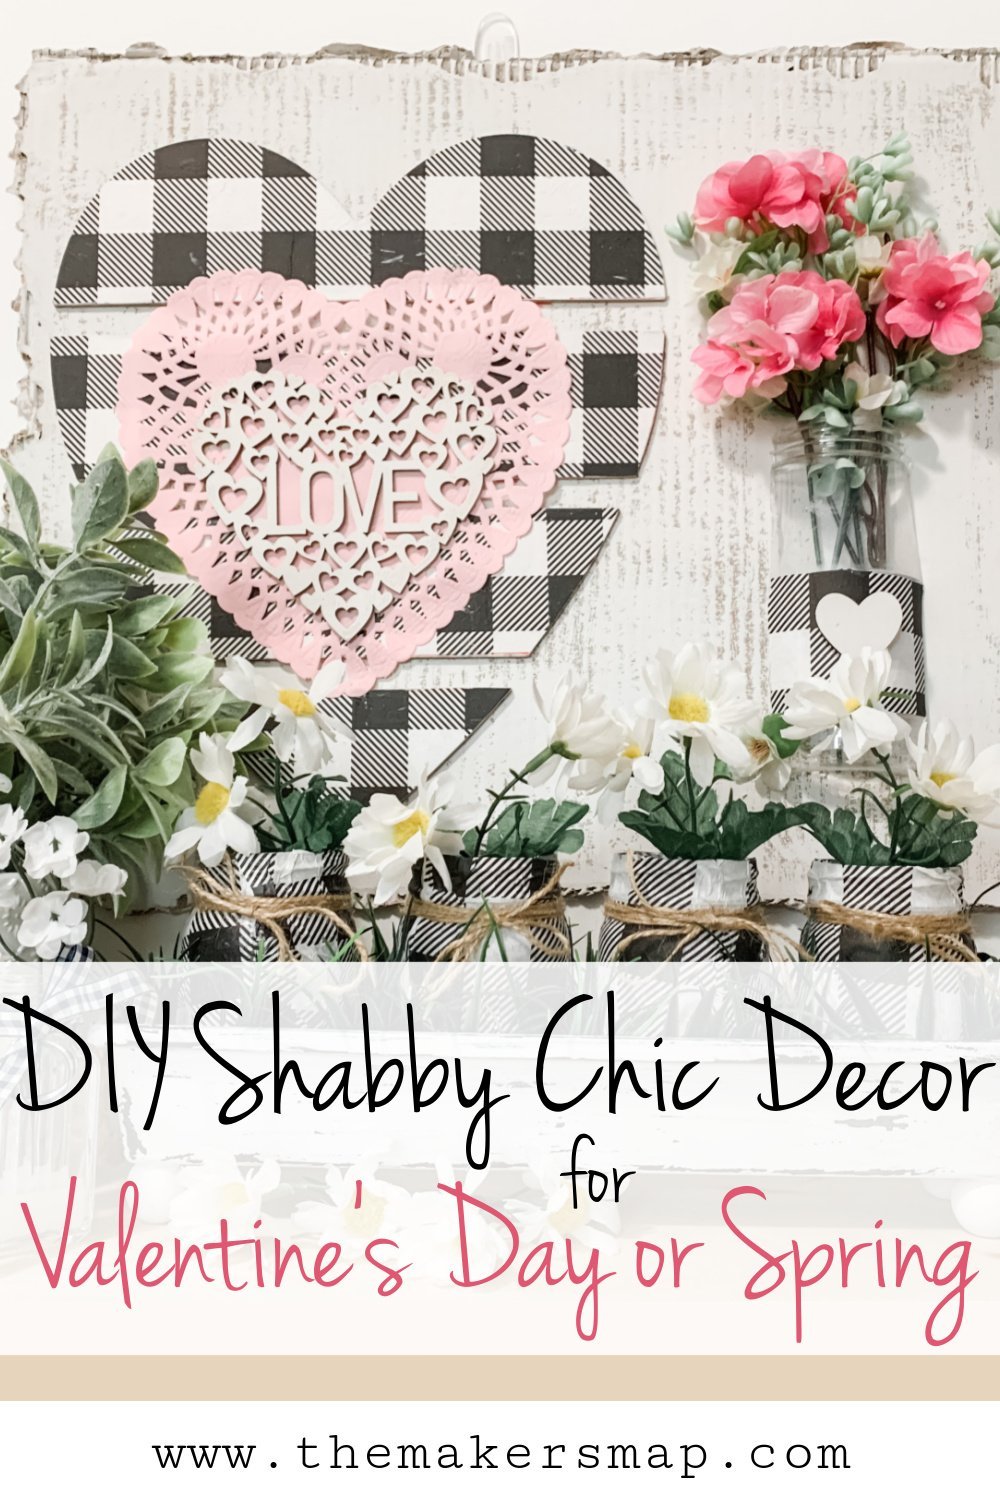 Valentine's Day or Spring Decor with Fake Flowers